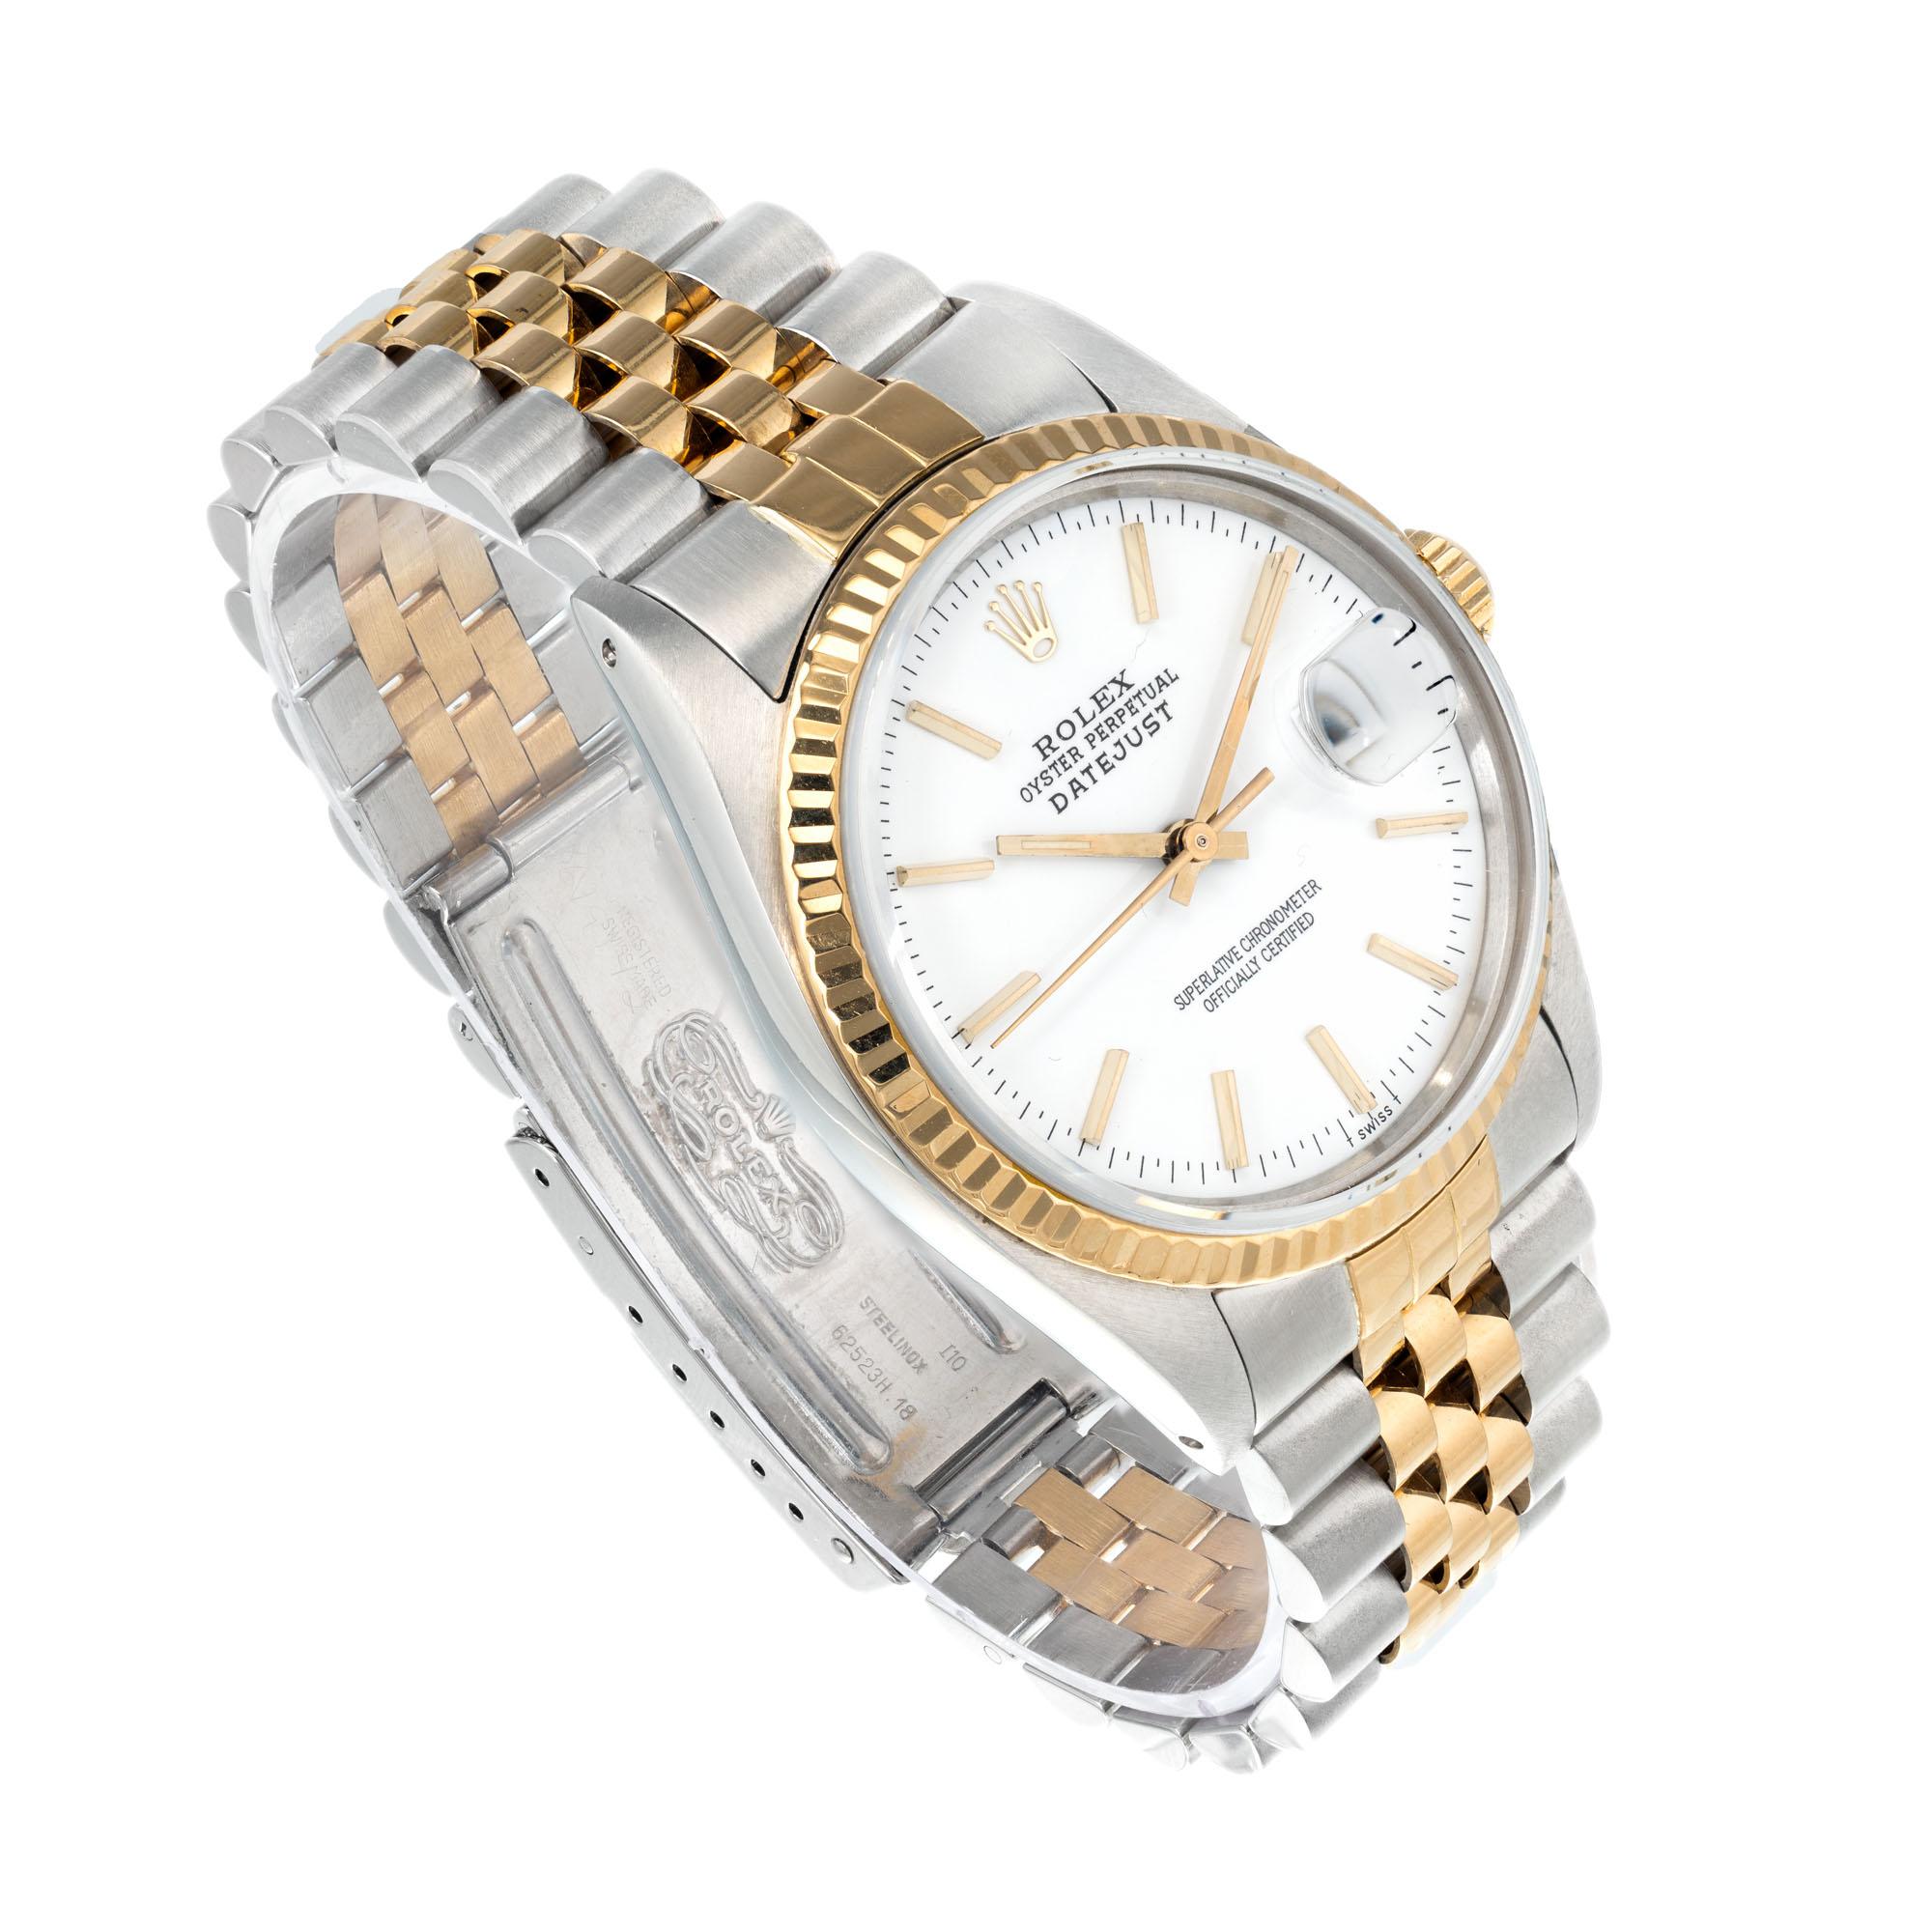 Mens Rolex Datejust 16013 circa 1984 white rolex dial. Sapphire crystal. Steel and 18k yellow gold band

18k yellow Gold
Stainless Steel 
Length: 43.80mm
Width: 36mm
Band width at case: 20mm
Case thickness: 11.72mm
Band: 18k Stainless Steel jubilee